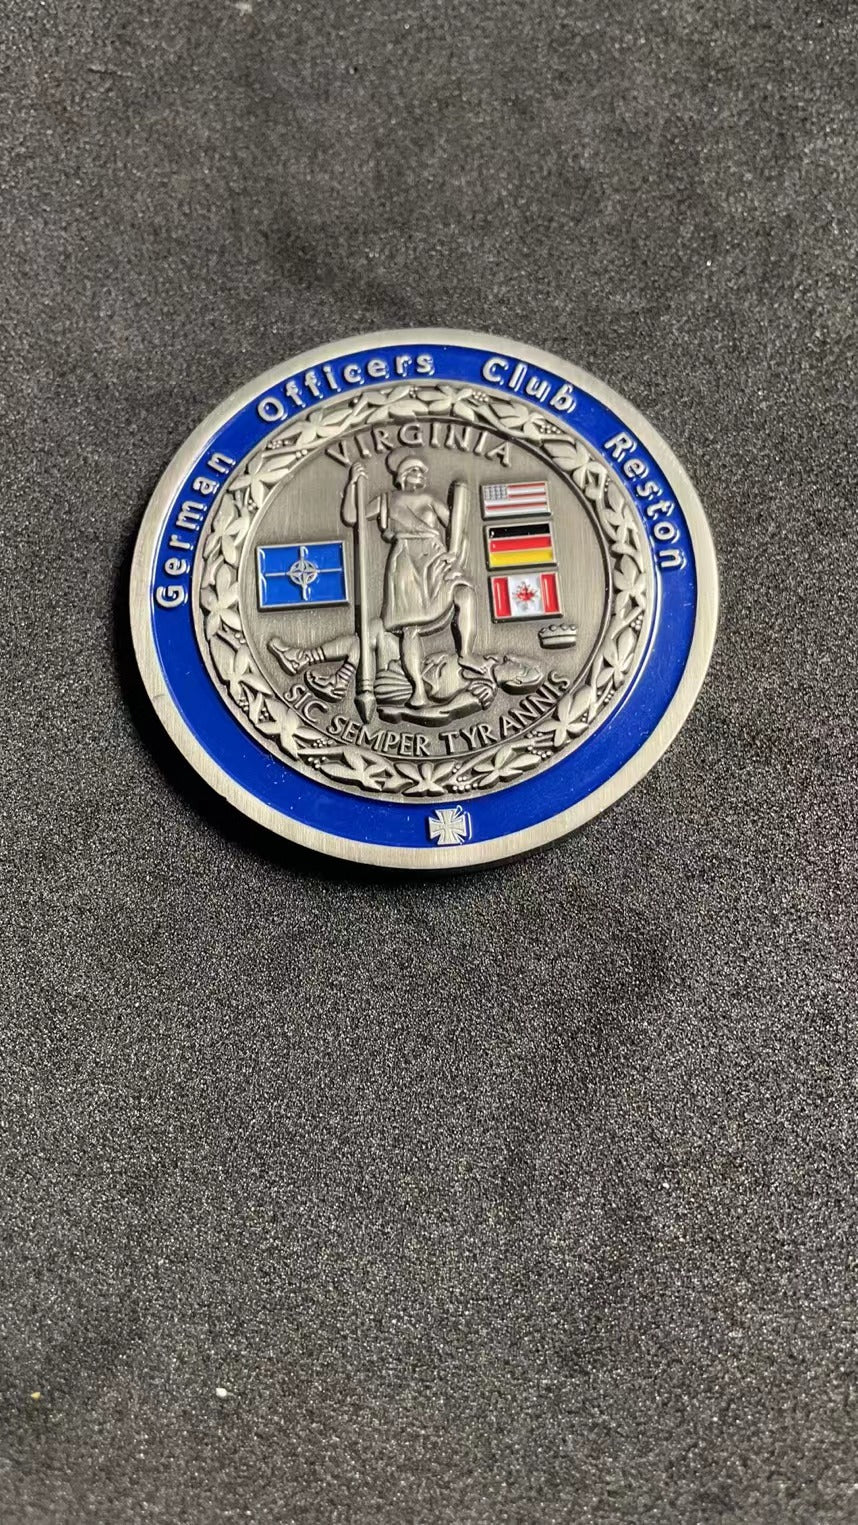 Custom Challenge Coin Double Sided Struck Brass